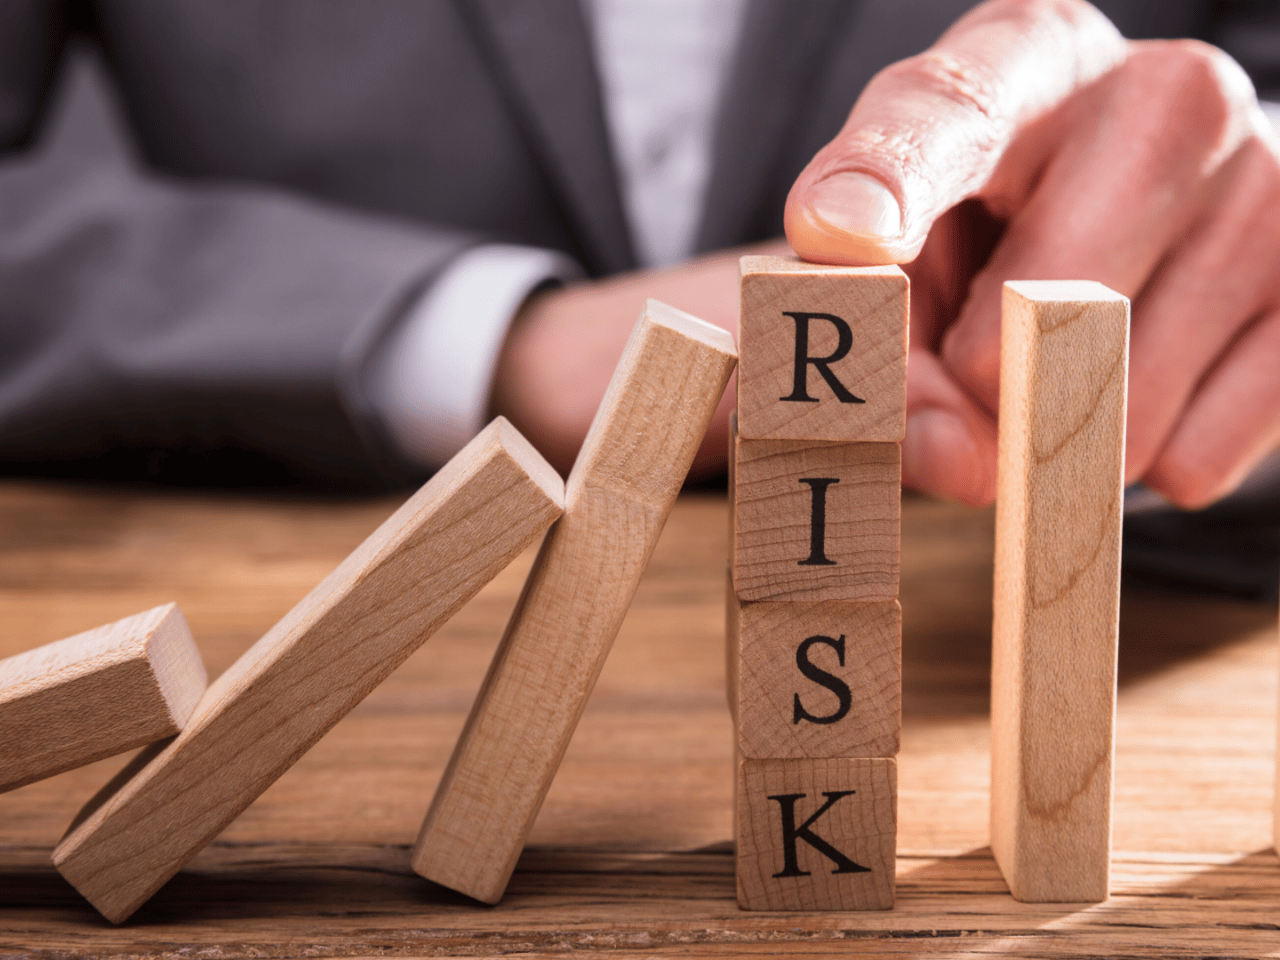 A Crash Course On Risk Analysis and Risk Mitigation